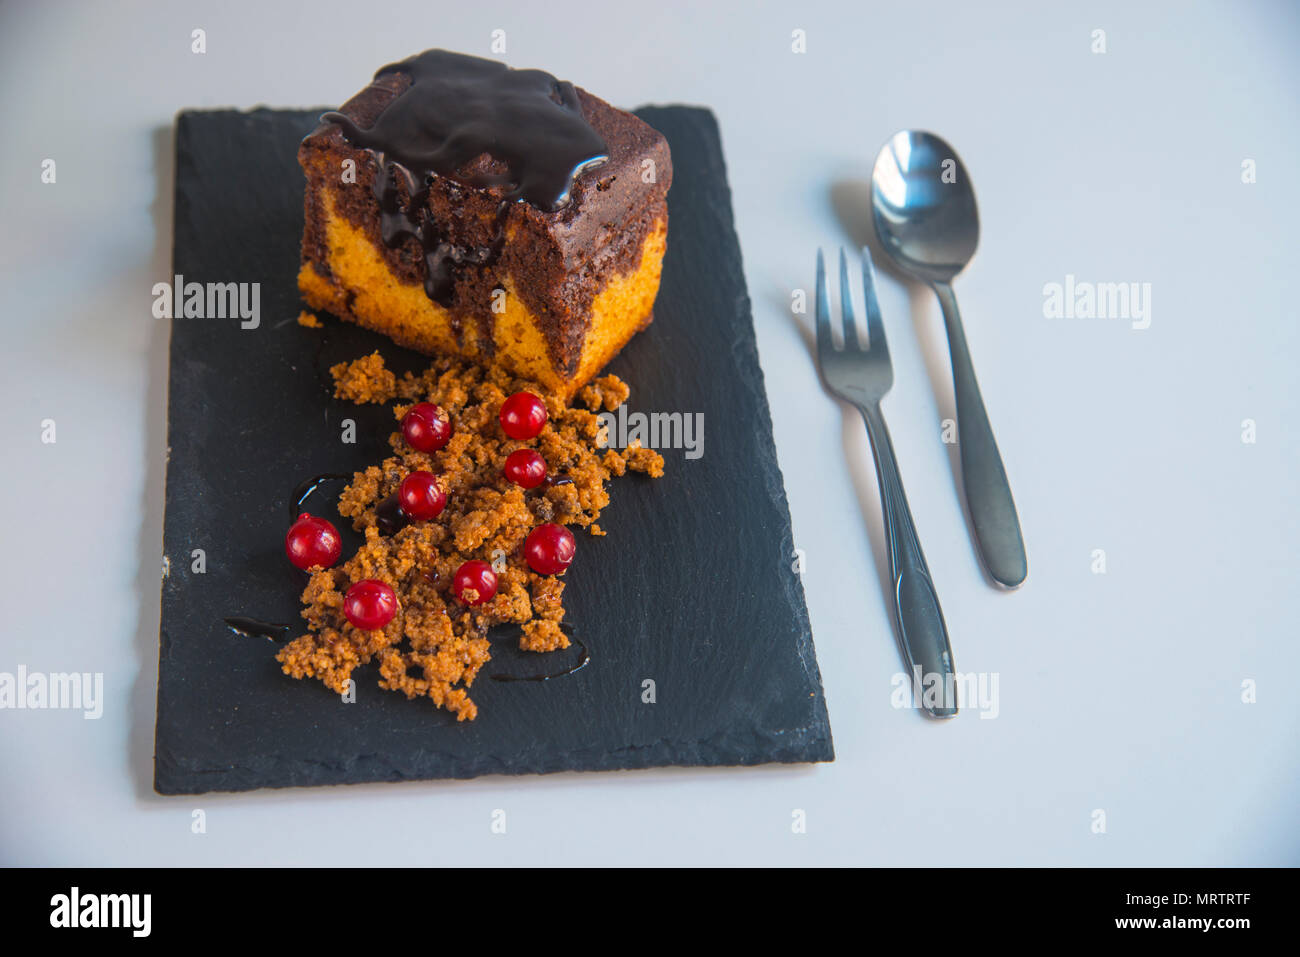 Marble cake with chocolate sauce and redcurrants. Stock Photo